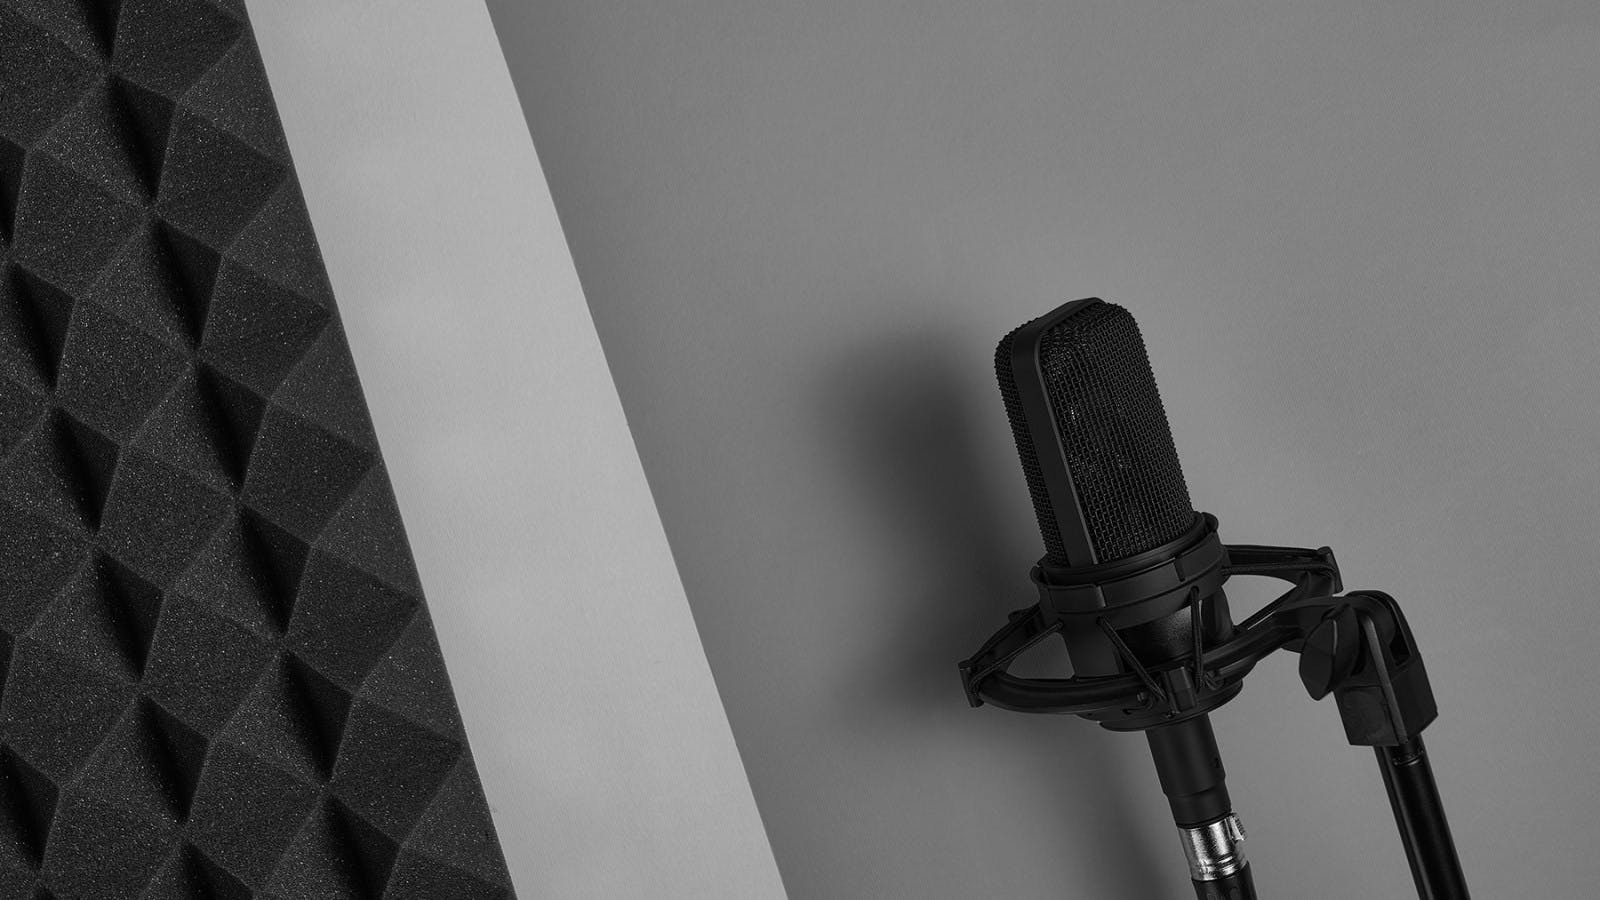 Five Steps To Soundproof Your Room for Podcasting